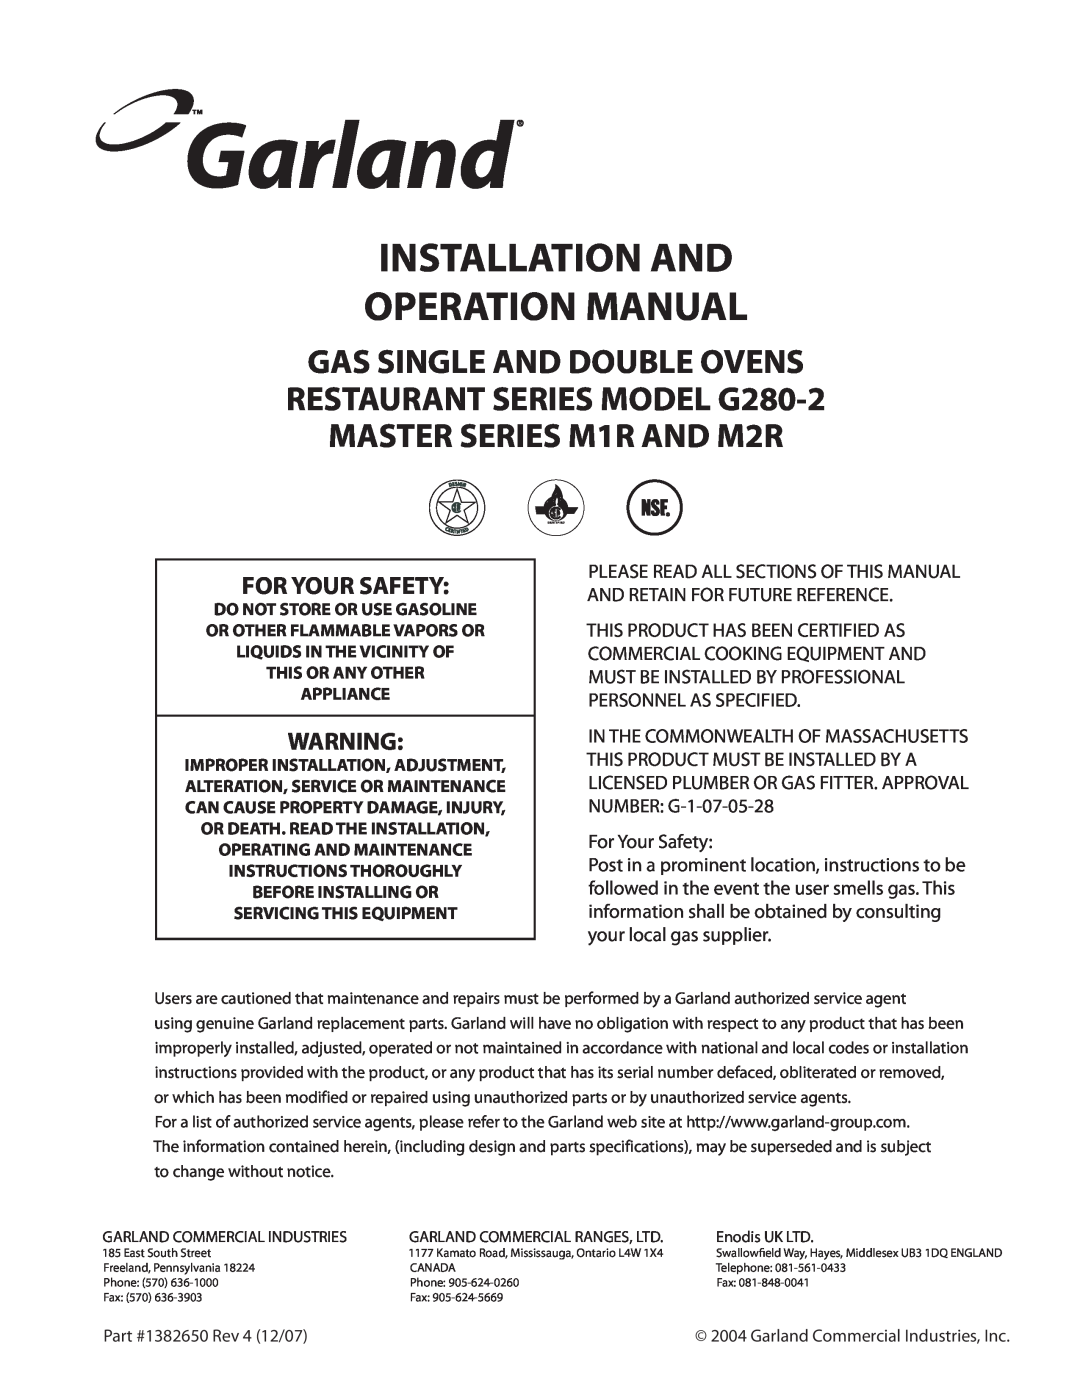 Garland G280-2 operation manual For Your Safety 